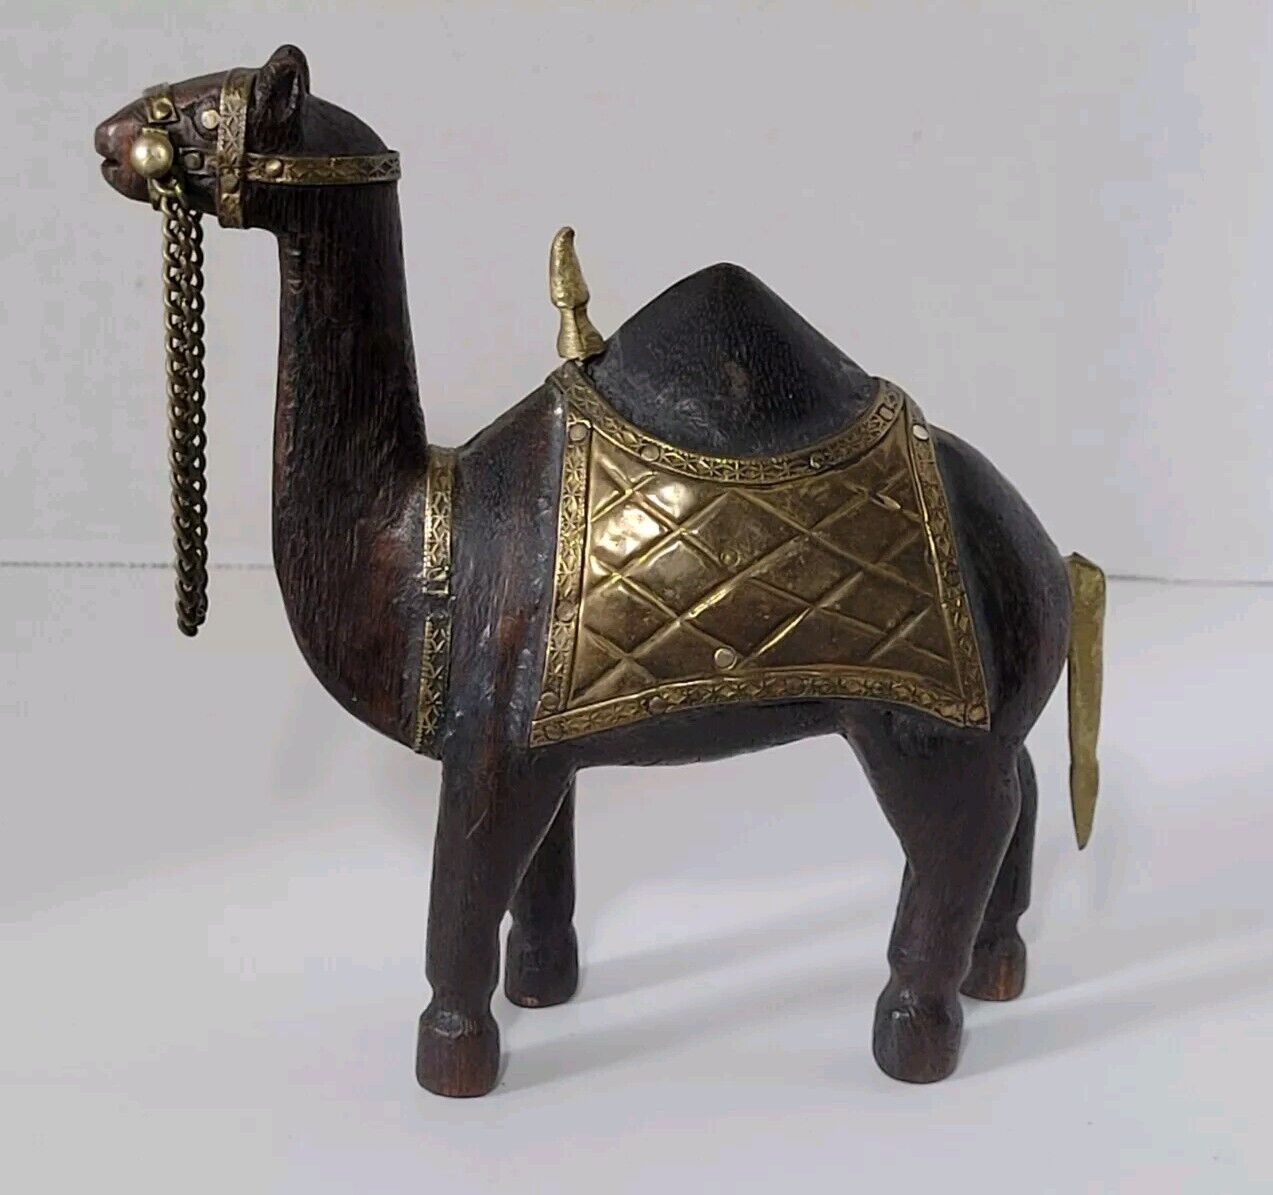 Vintage Wood Camel Hand Carved Statue Brass Copper Inlay India Decor Figurine 